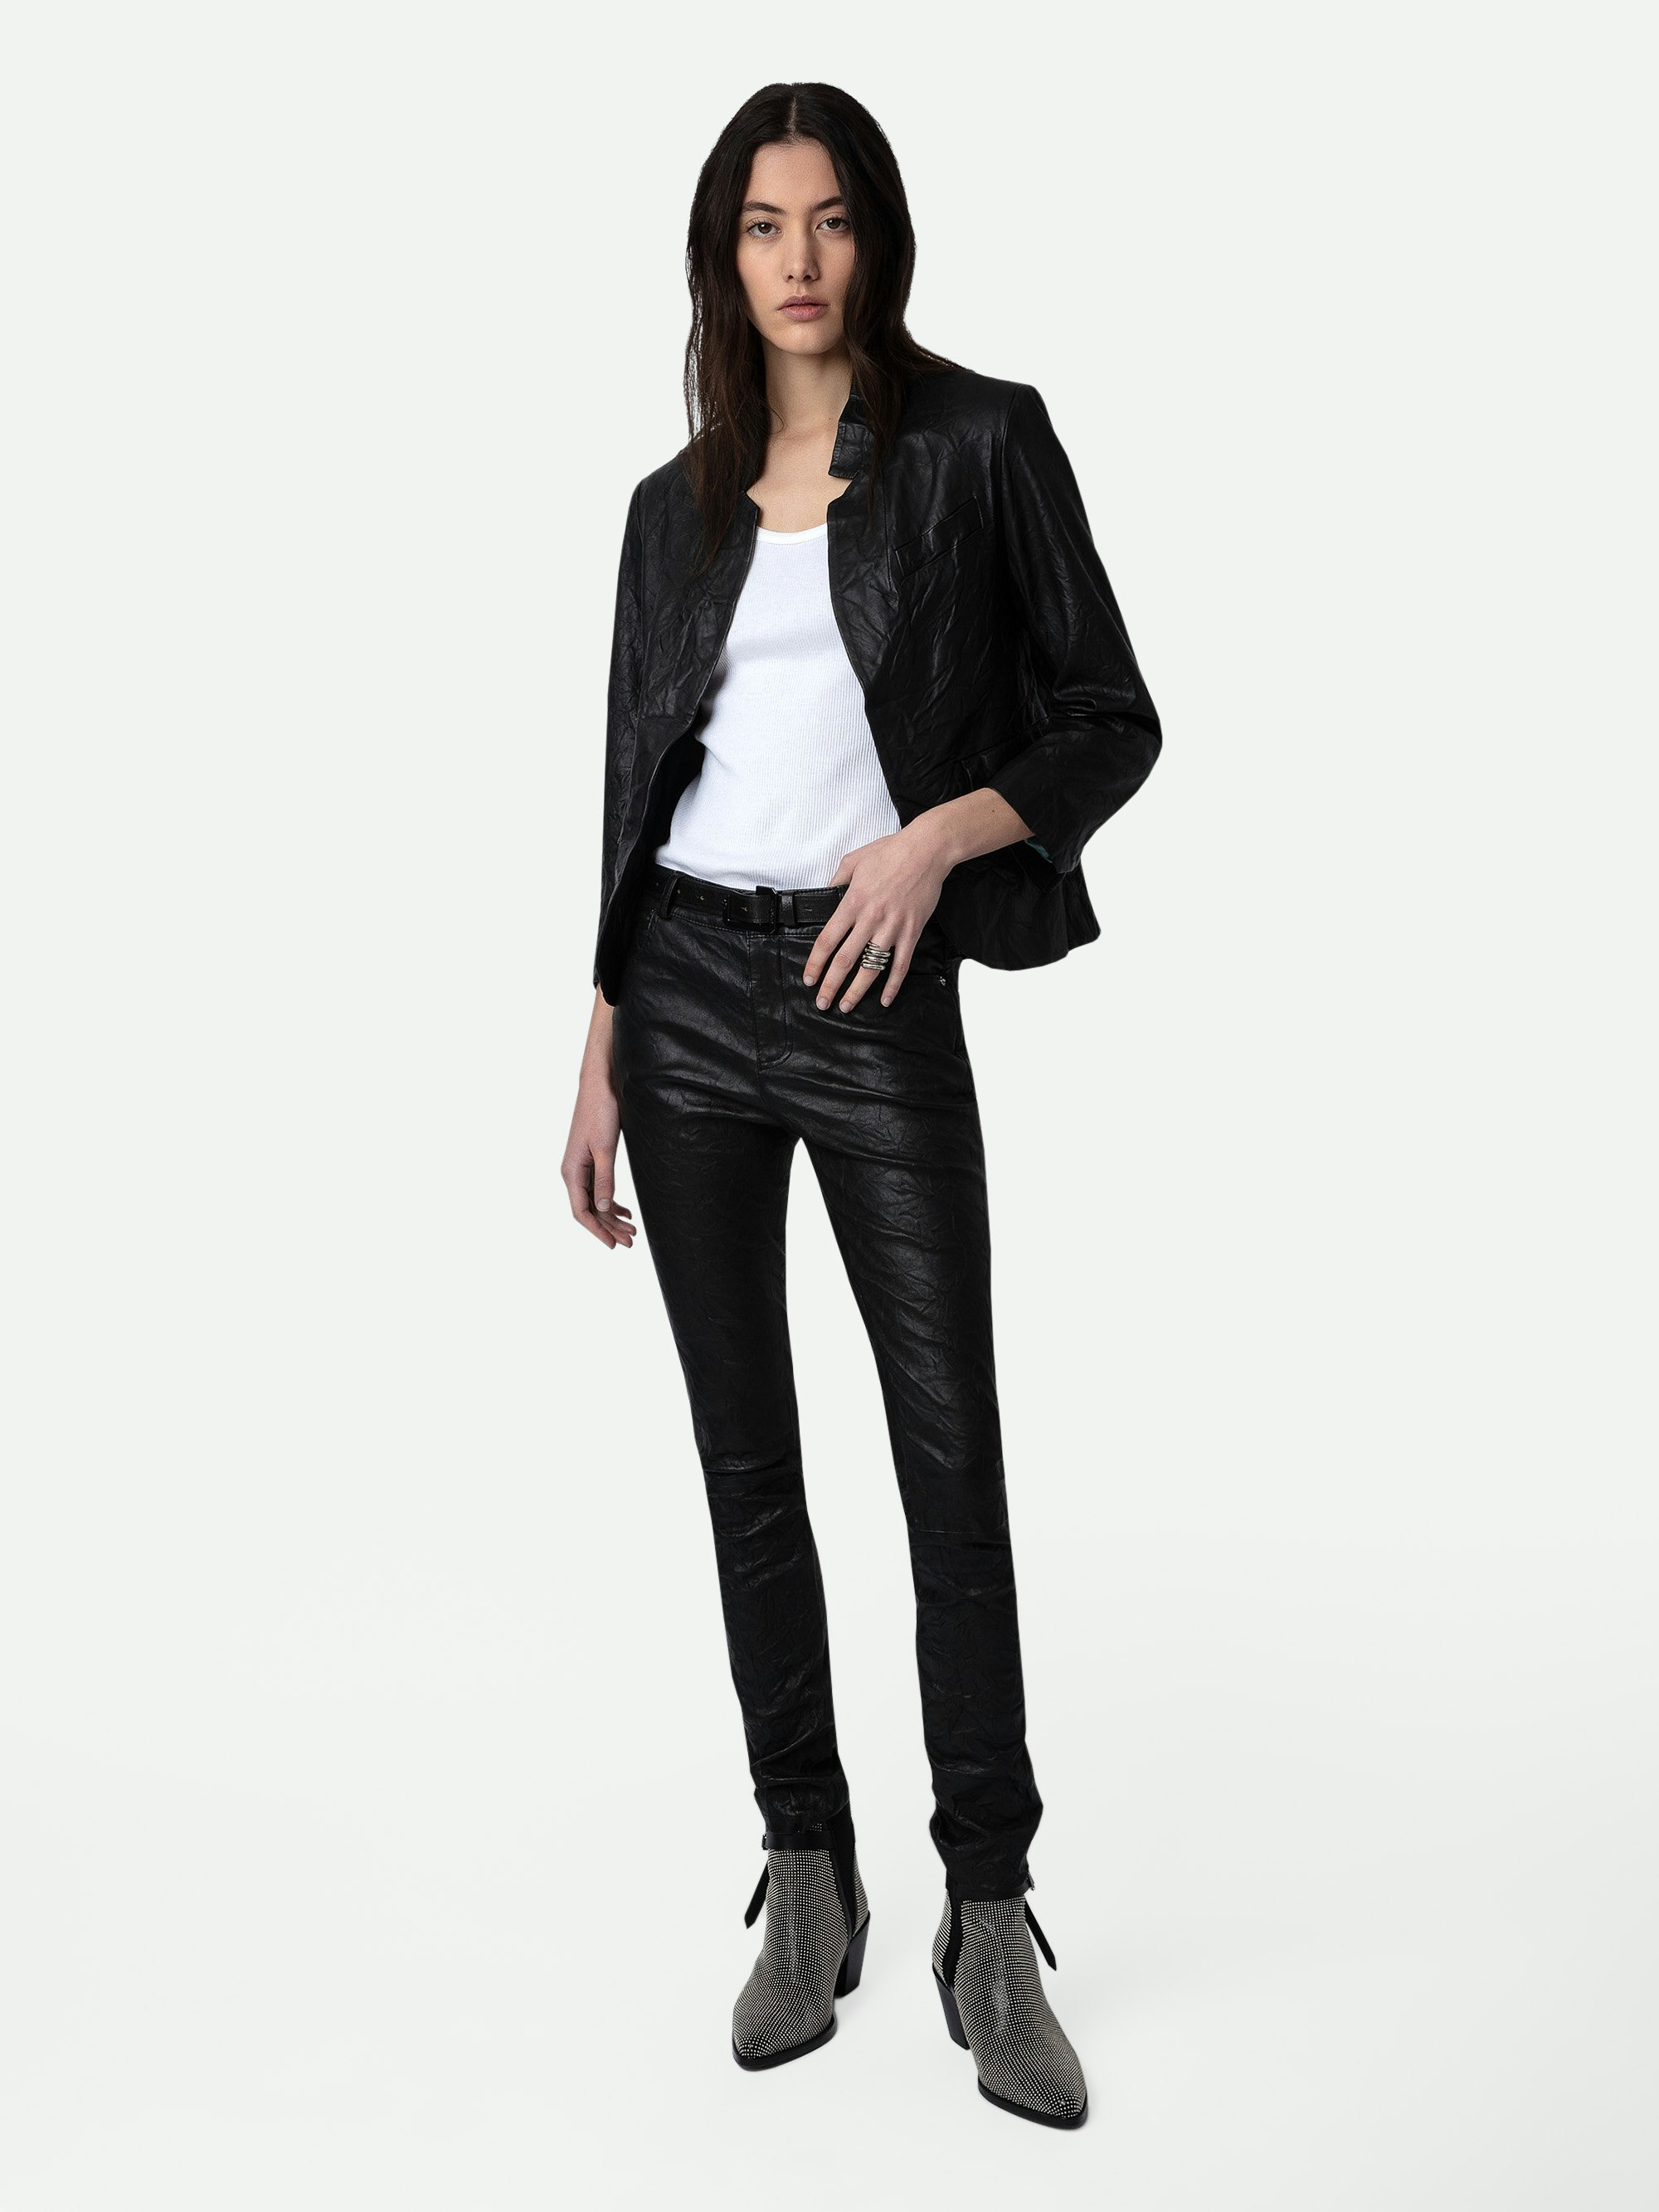 Phlame Crinkled Leather Pants - Lambskin pants